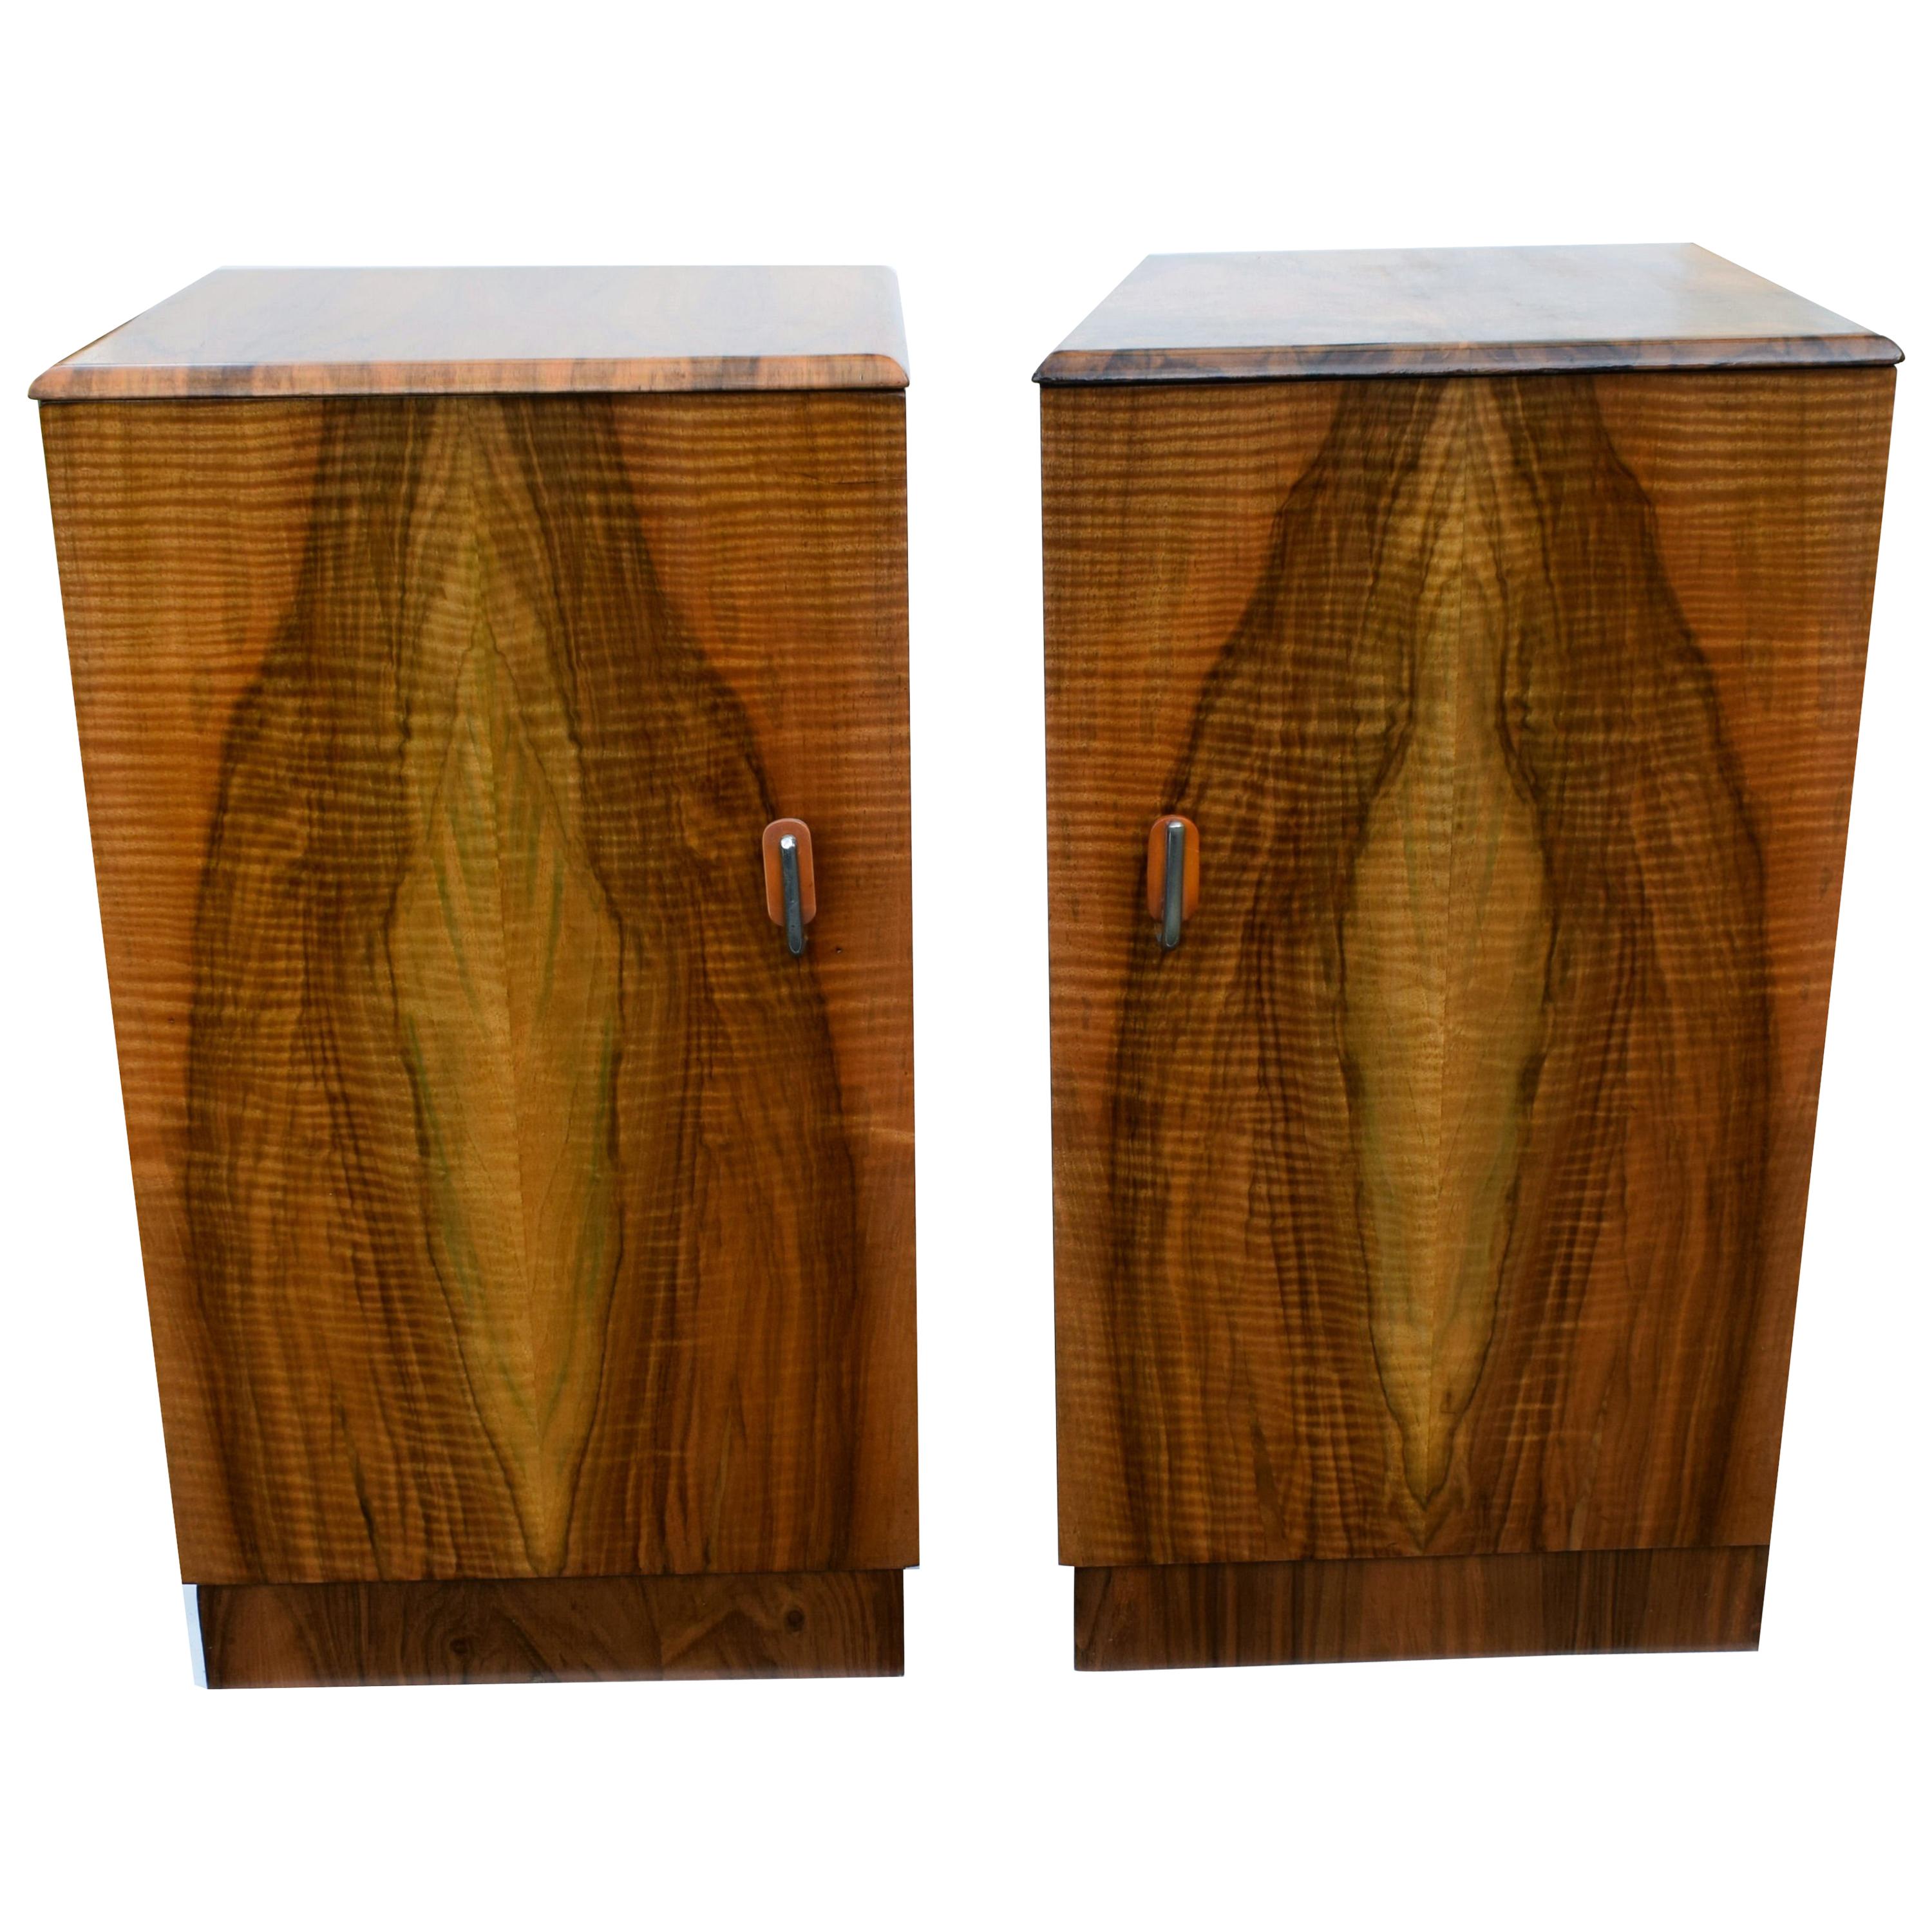 Matching Pair of Art Deco Walnut Bedside Table Cabinets